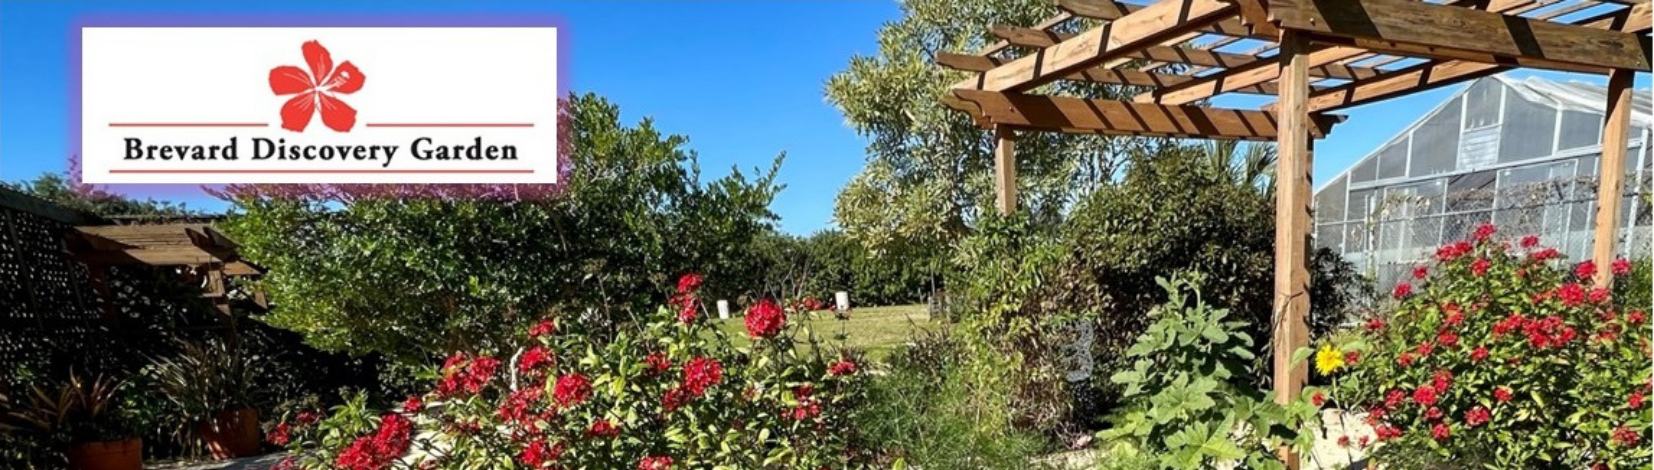 Gazebo with red flowers, bushes, pathway, and the Brevard Discovery Garden logo